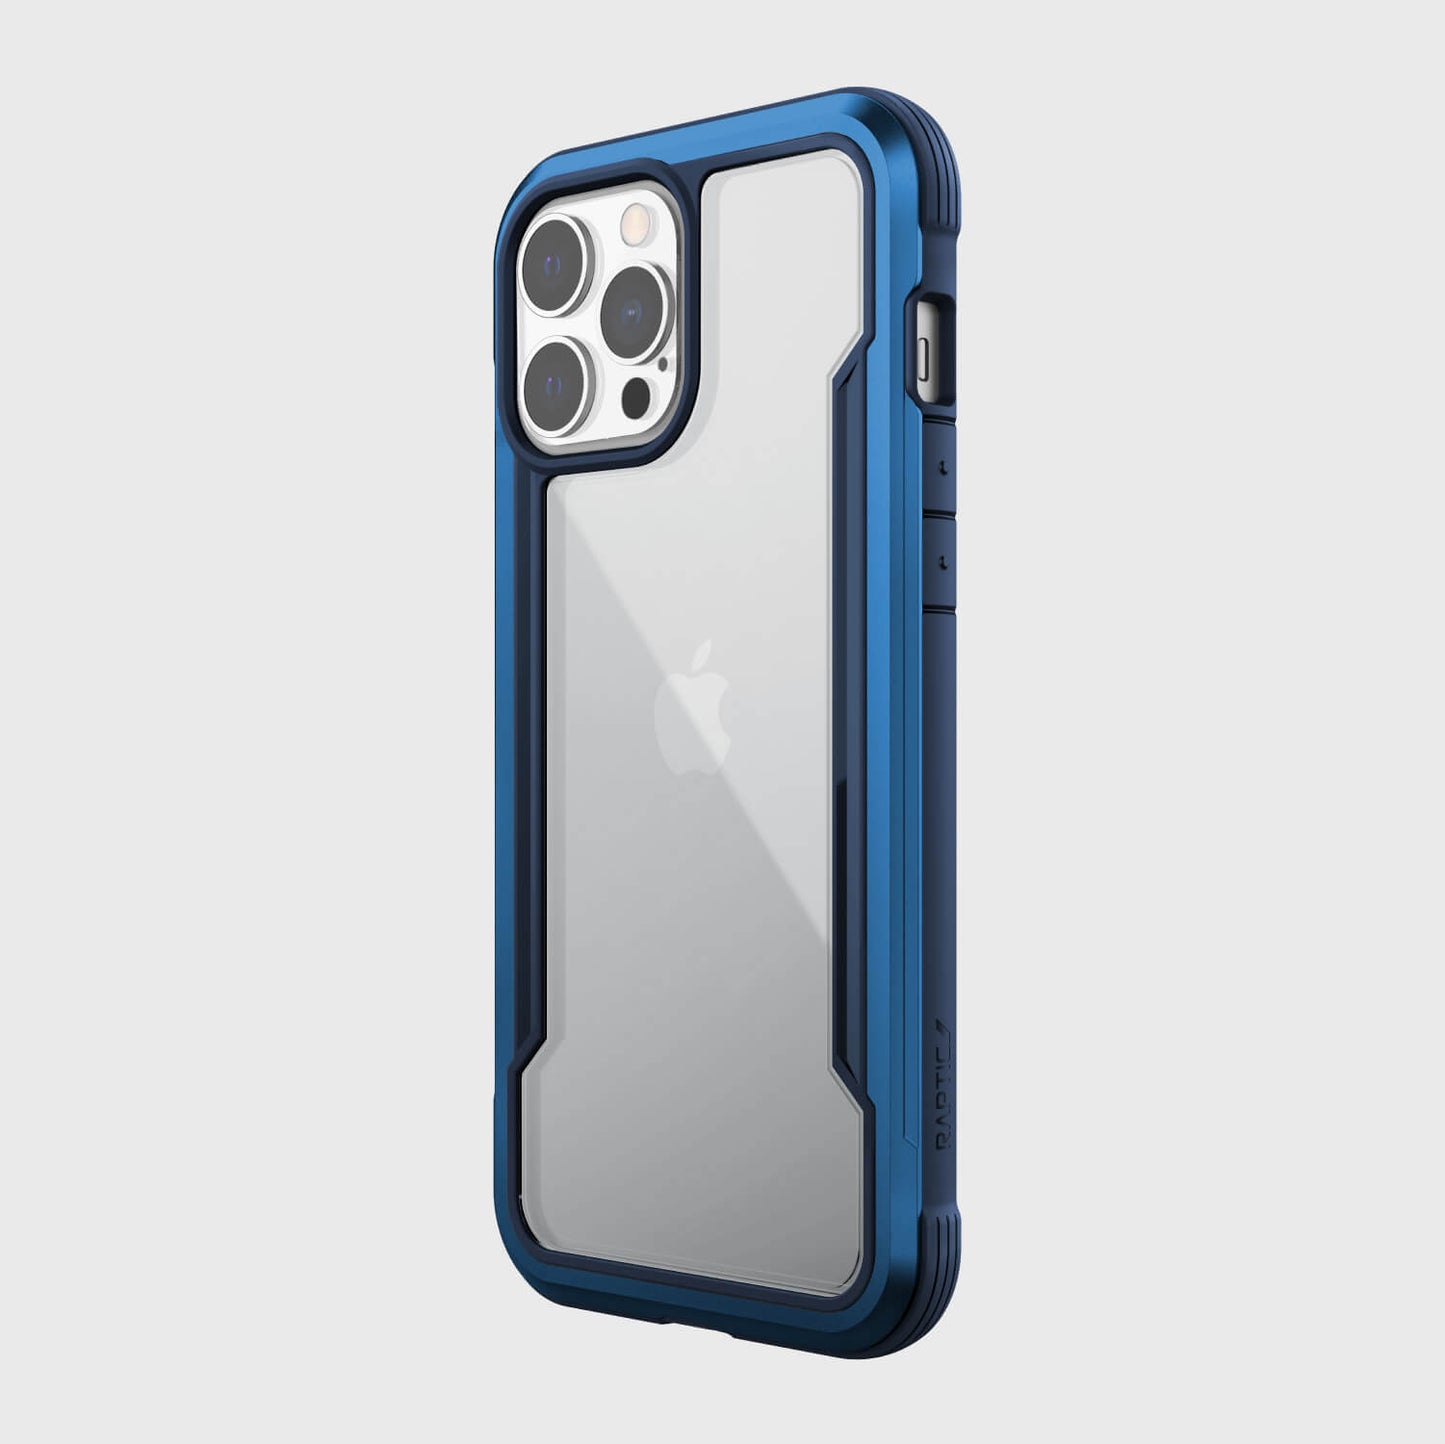 Showing the back of an iPhone 13 Pro Max in a Raptic Shield blue case